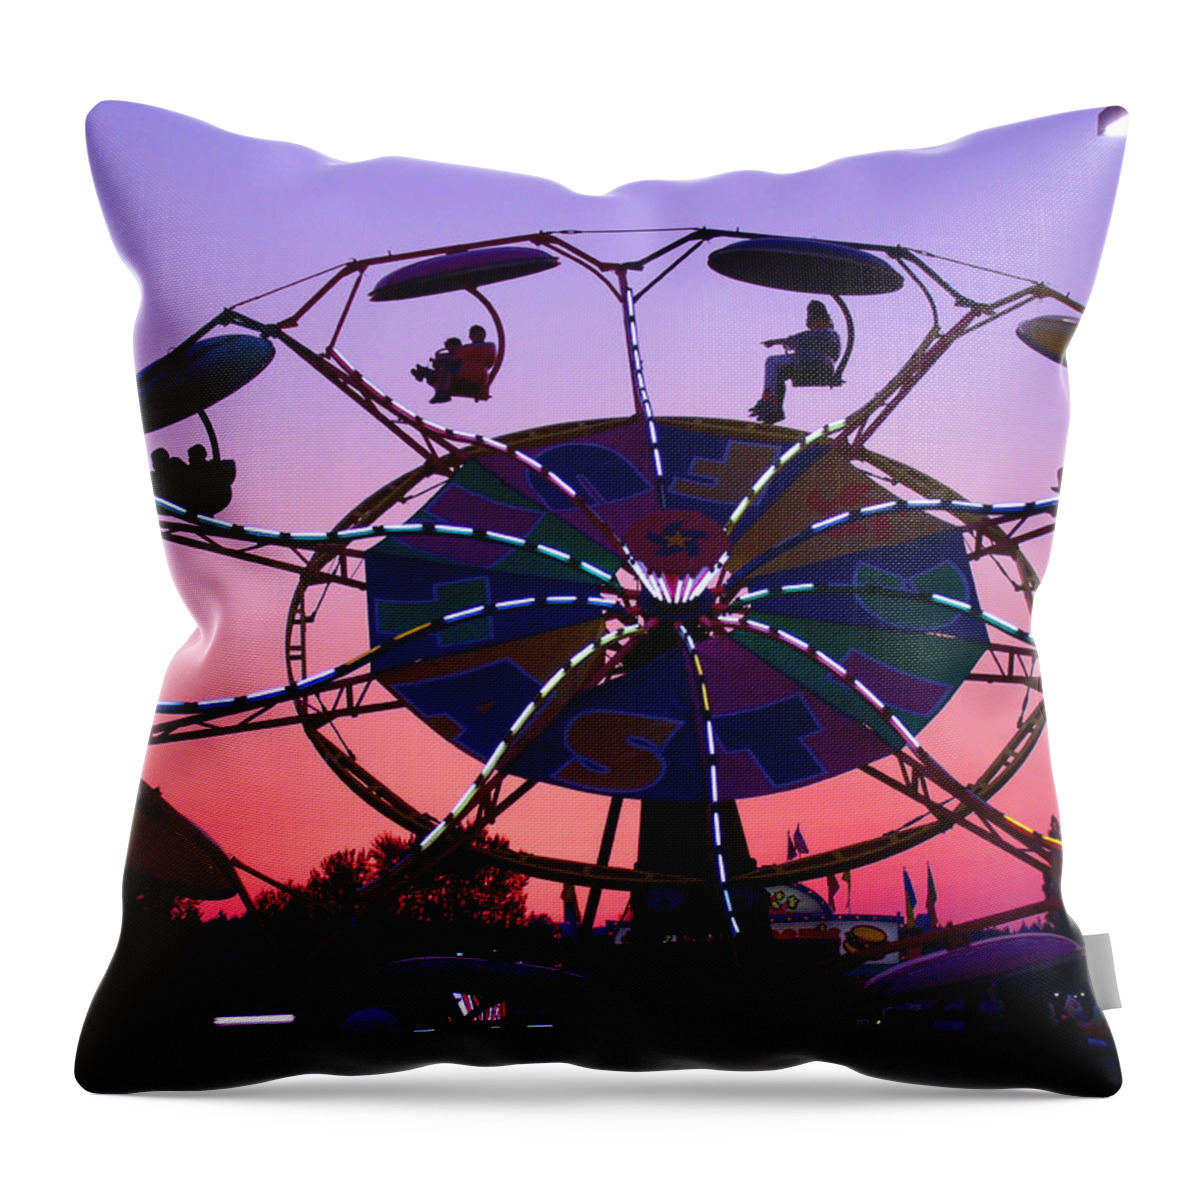 Amusement Park Rides Throw Pillow featuring the photograph Fast Fun Ride At Sunset by Kym Backland